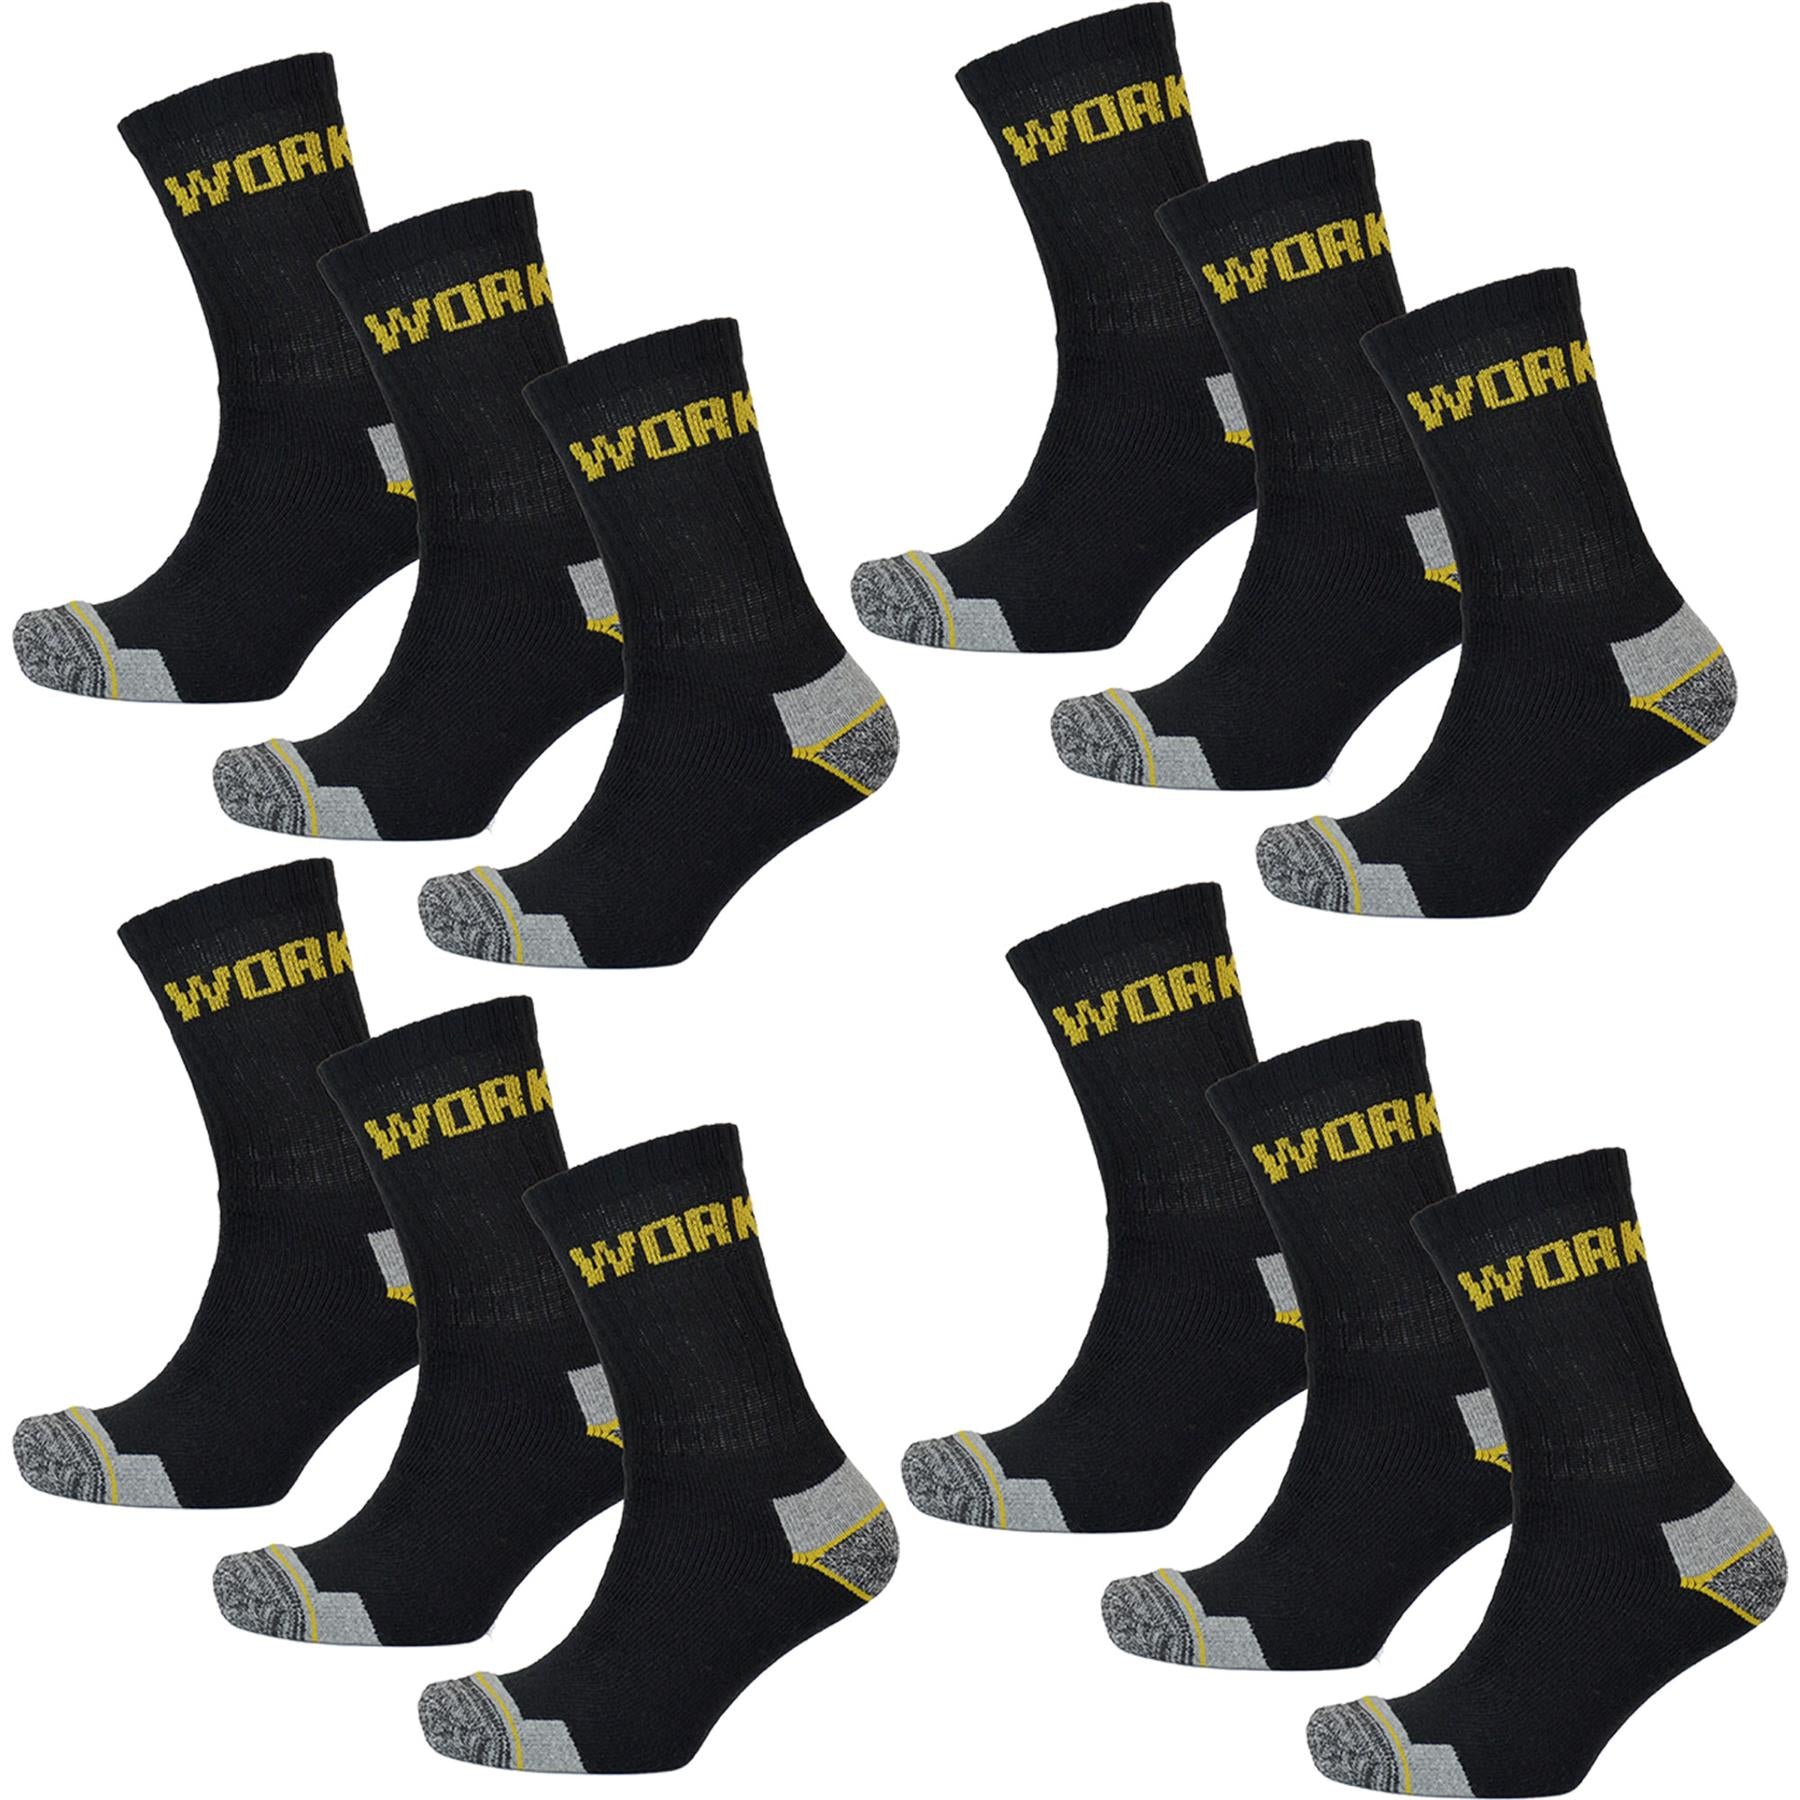 A2Z Mens Workwear Cotton Blend Comfortable 3, 6 or 12 Pack Outdoor Boot Socks